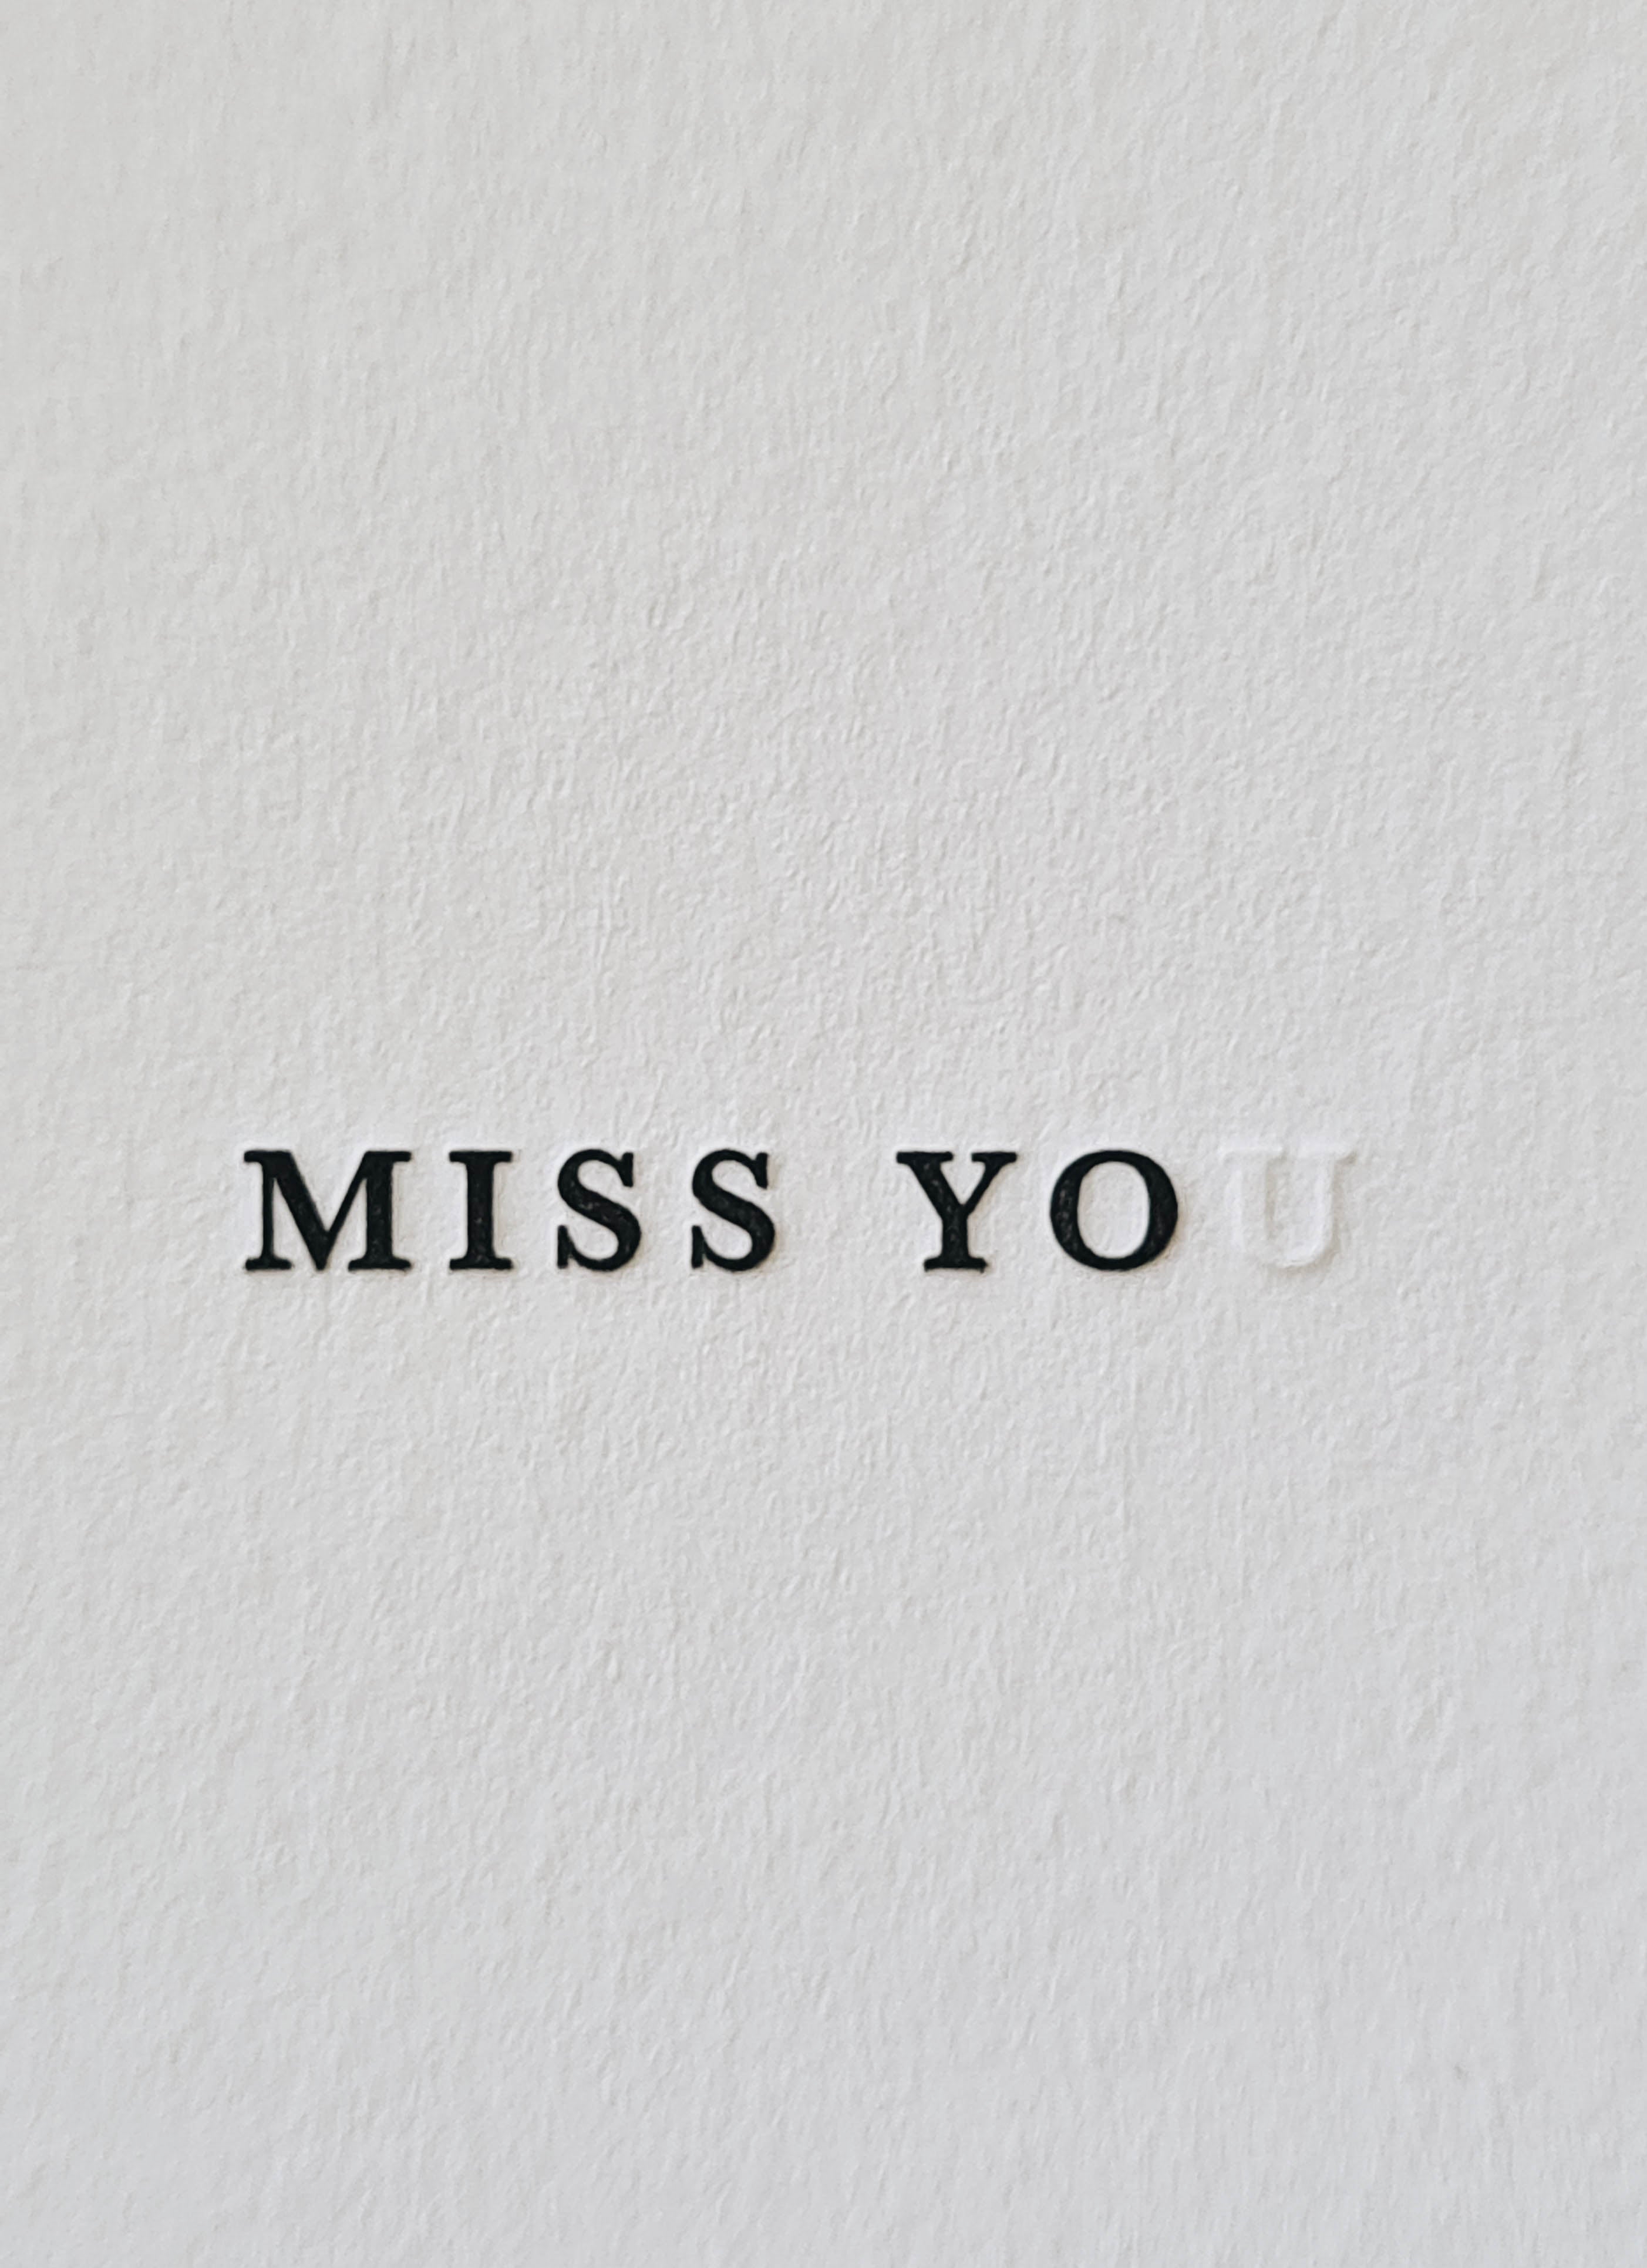 Greeting card - Miss You, Letterpress